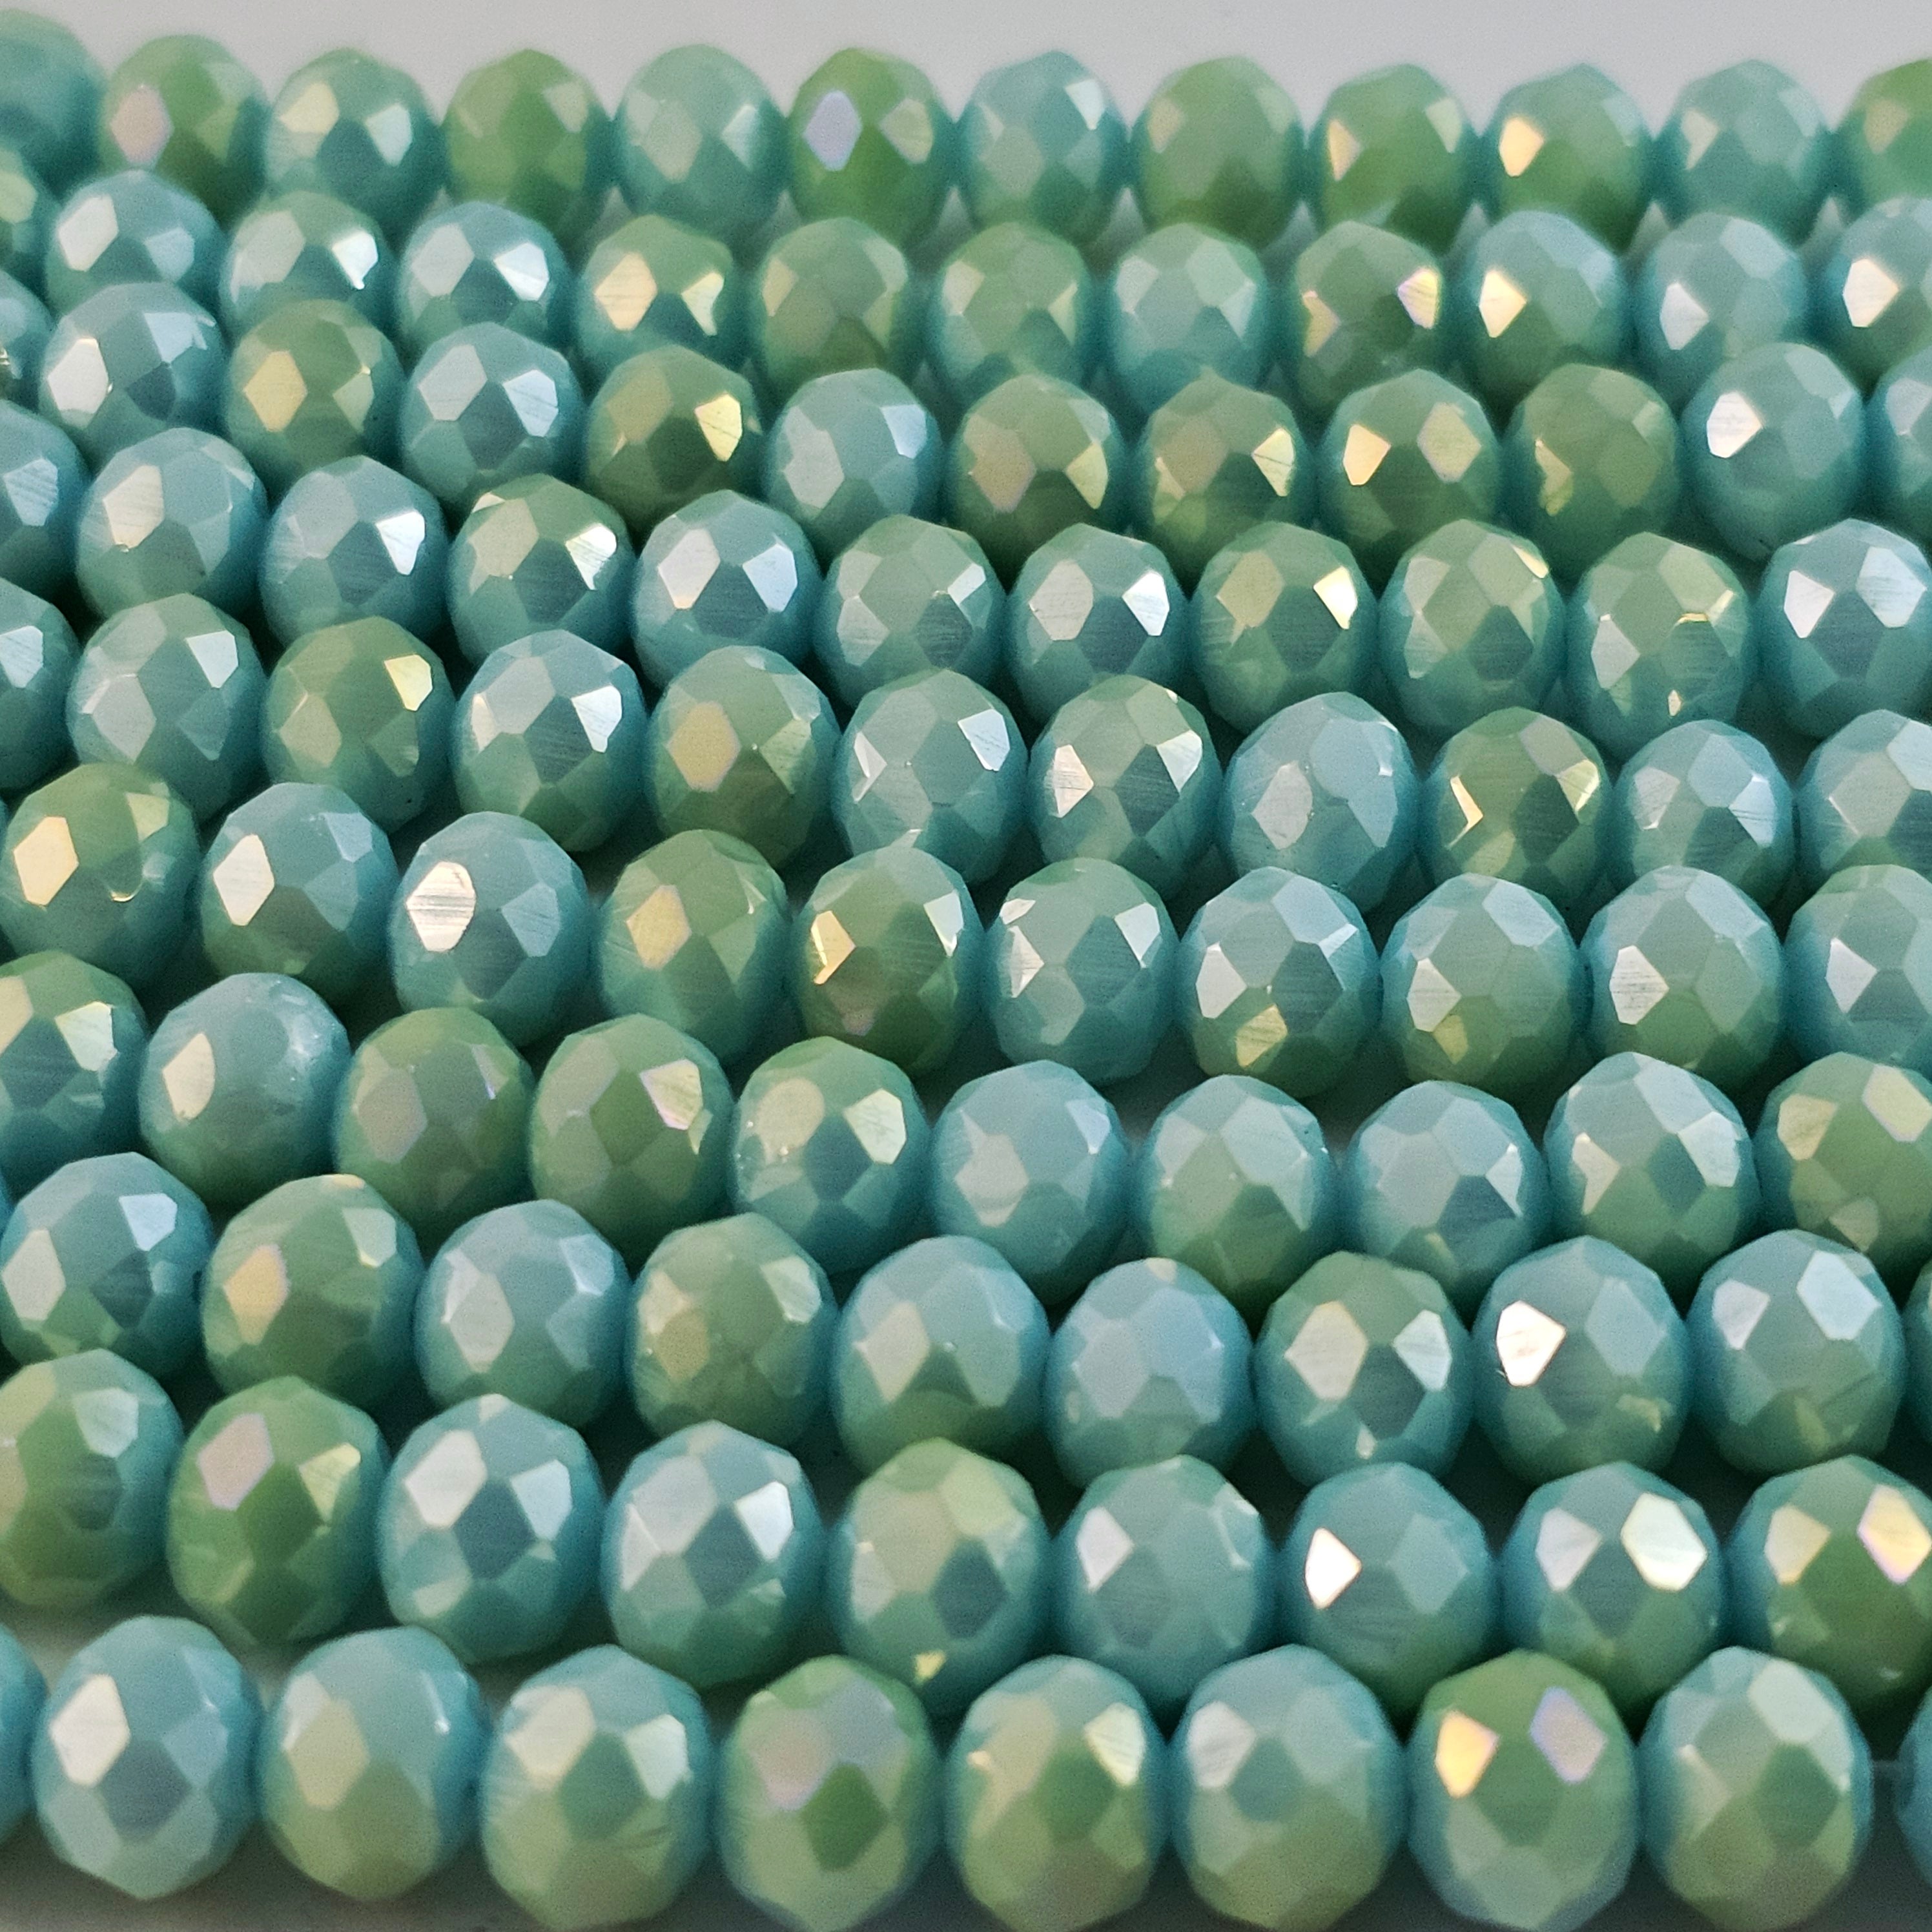 6x8mm Crystal Rondelles - Mint with Luster